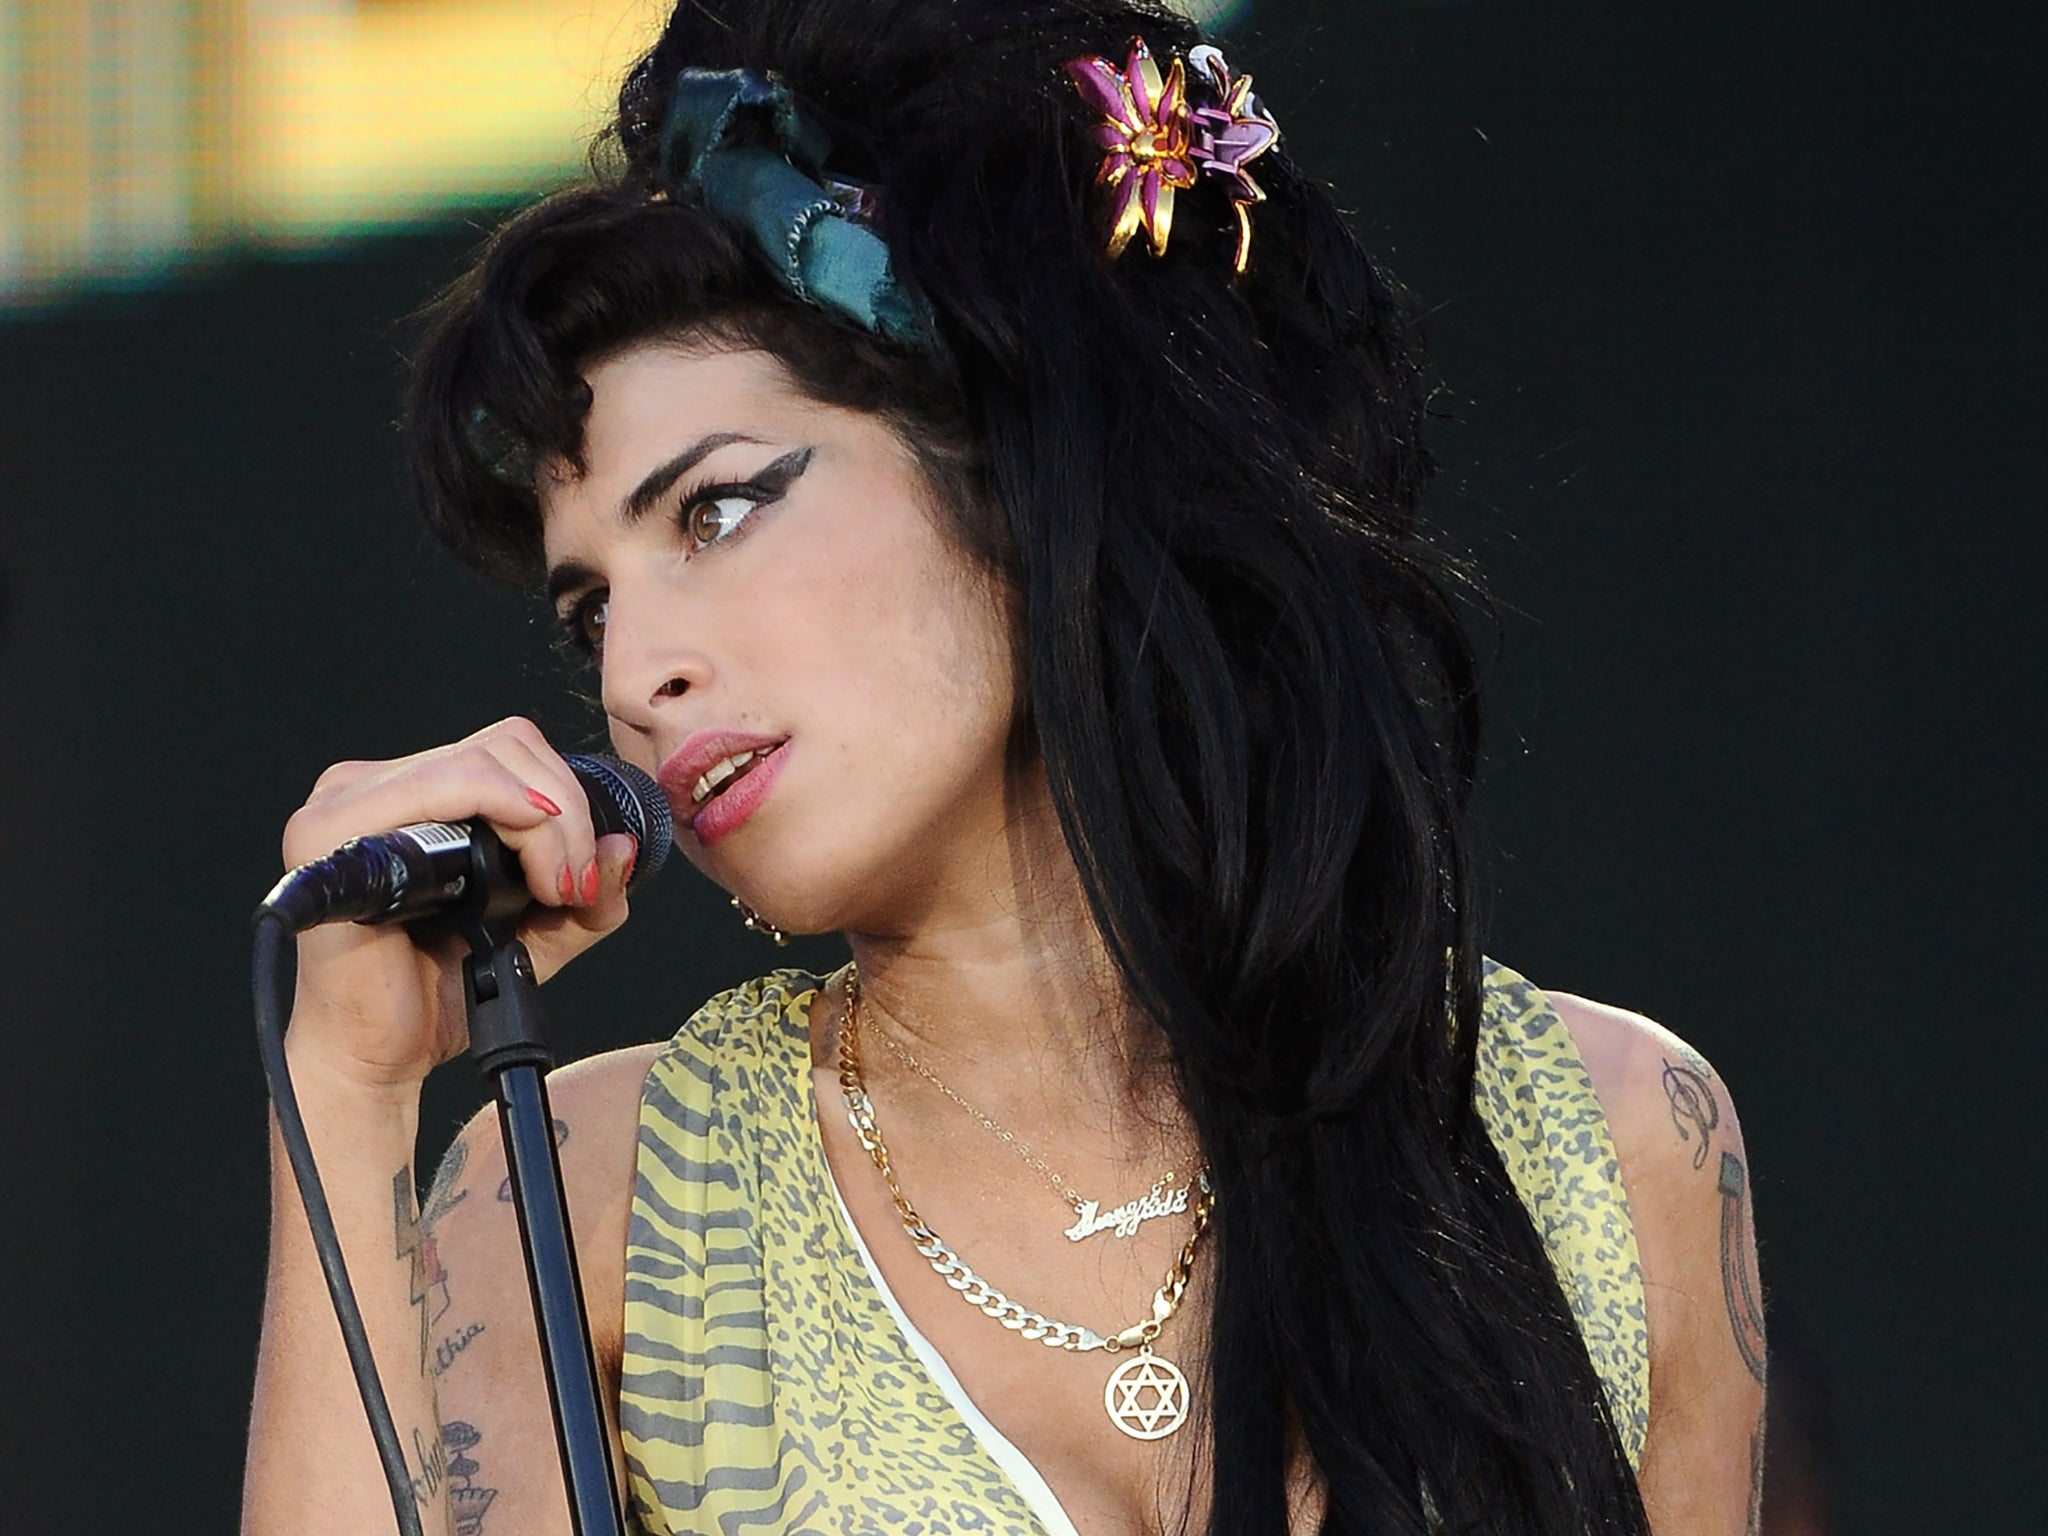 Is guilt or greed fuelling the new Amy Winehouse biopic?